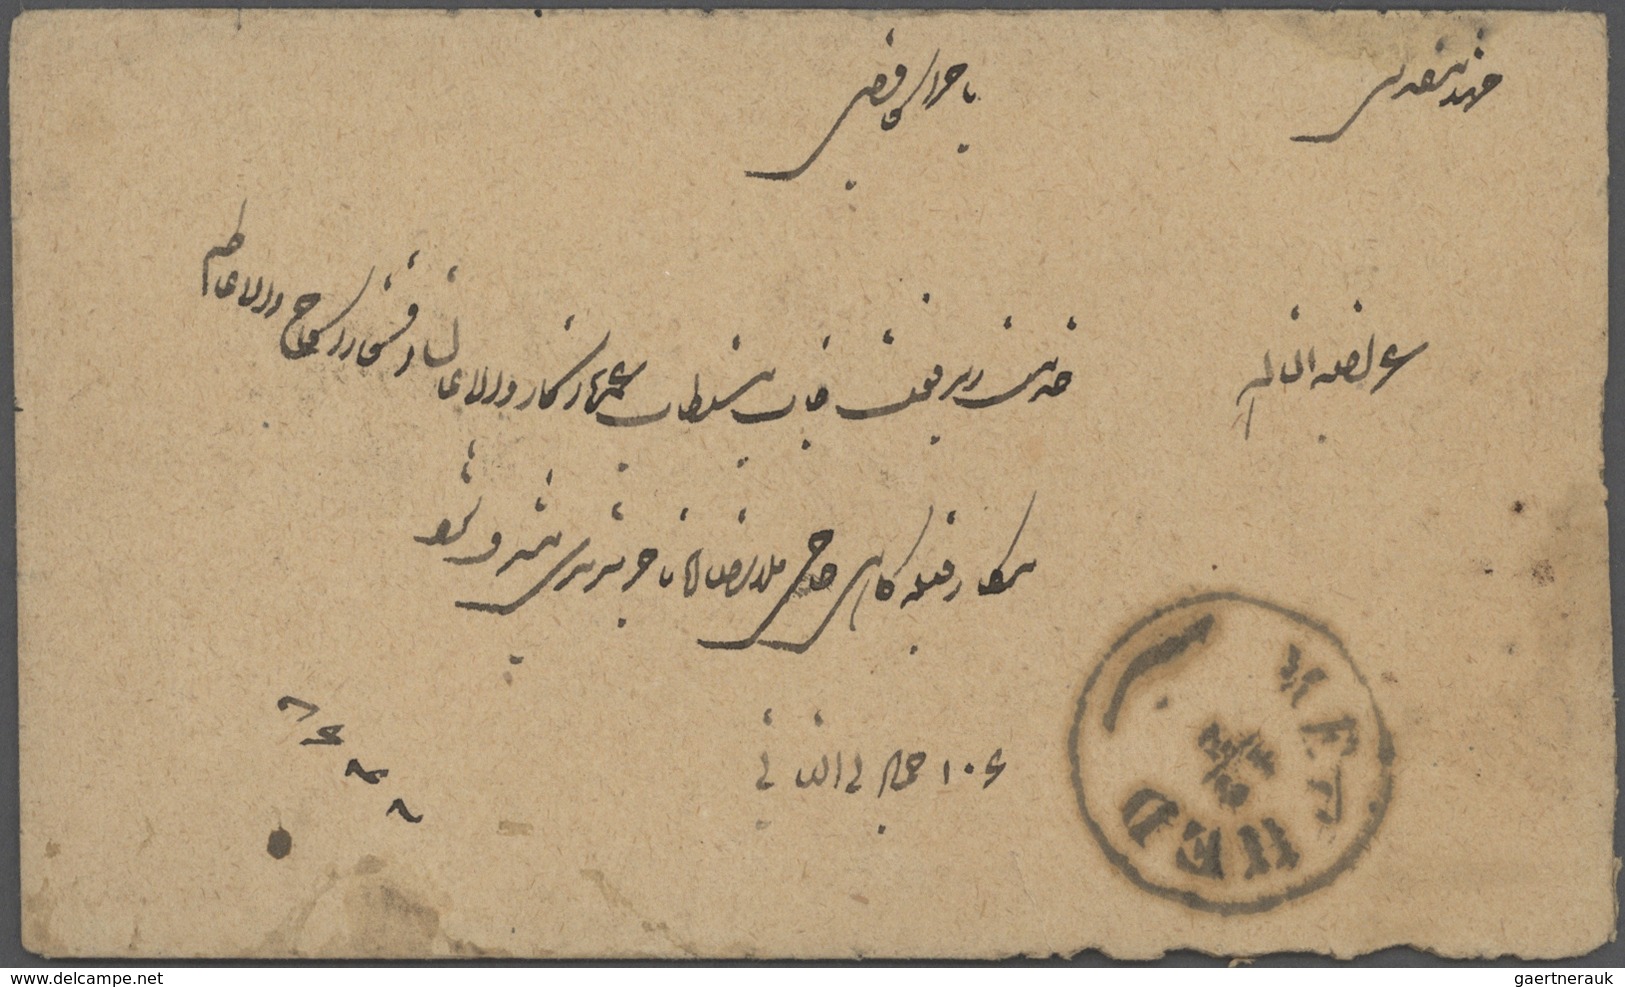 Iran: 1882-1928, Lot with covers & stationerys including early overprinted issues, waybills, pre pai